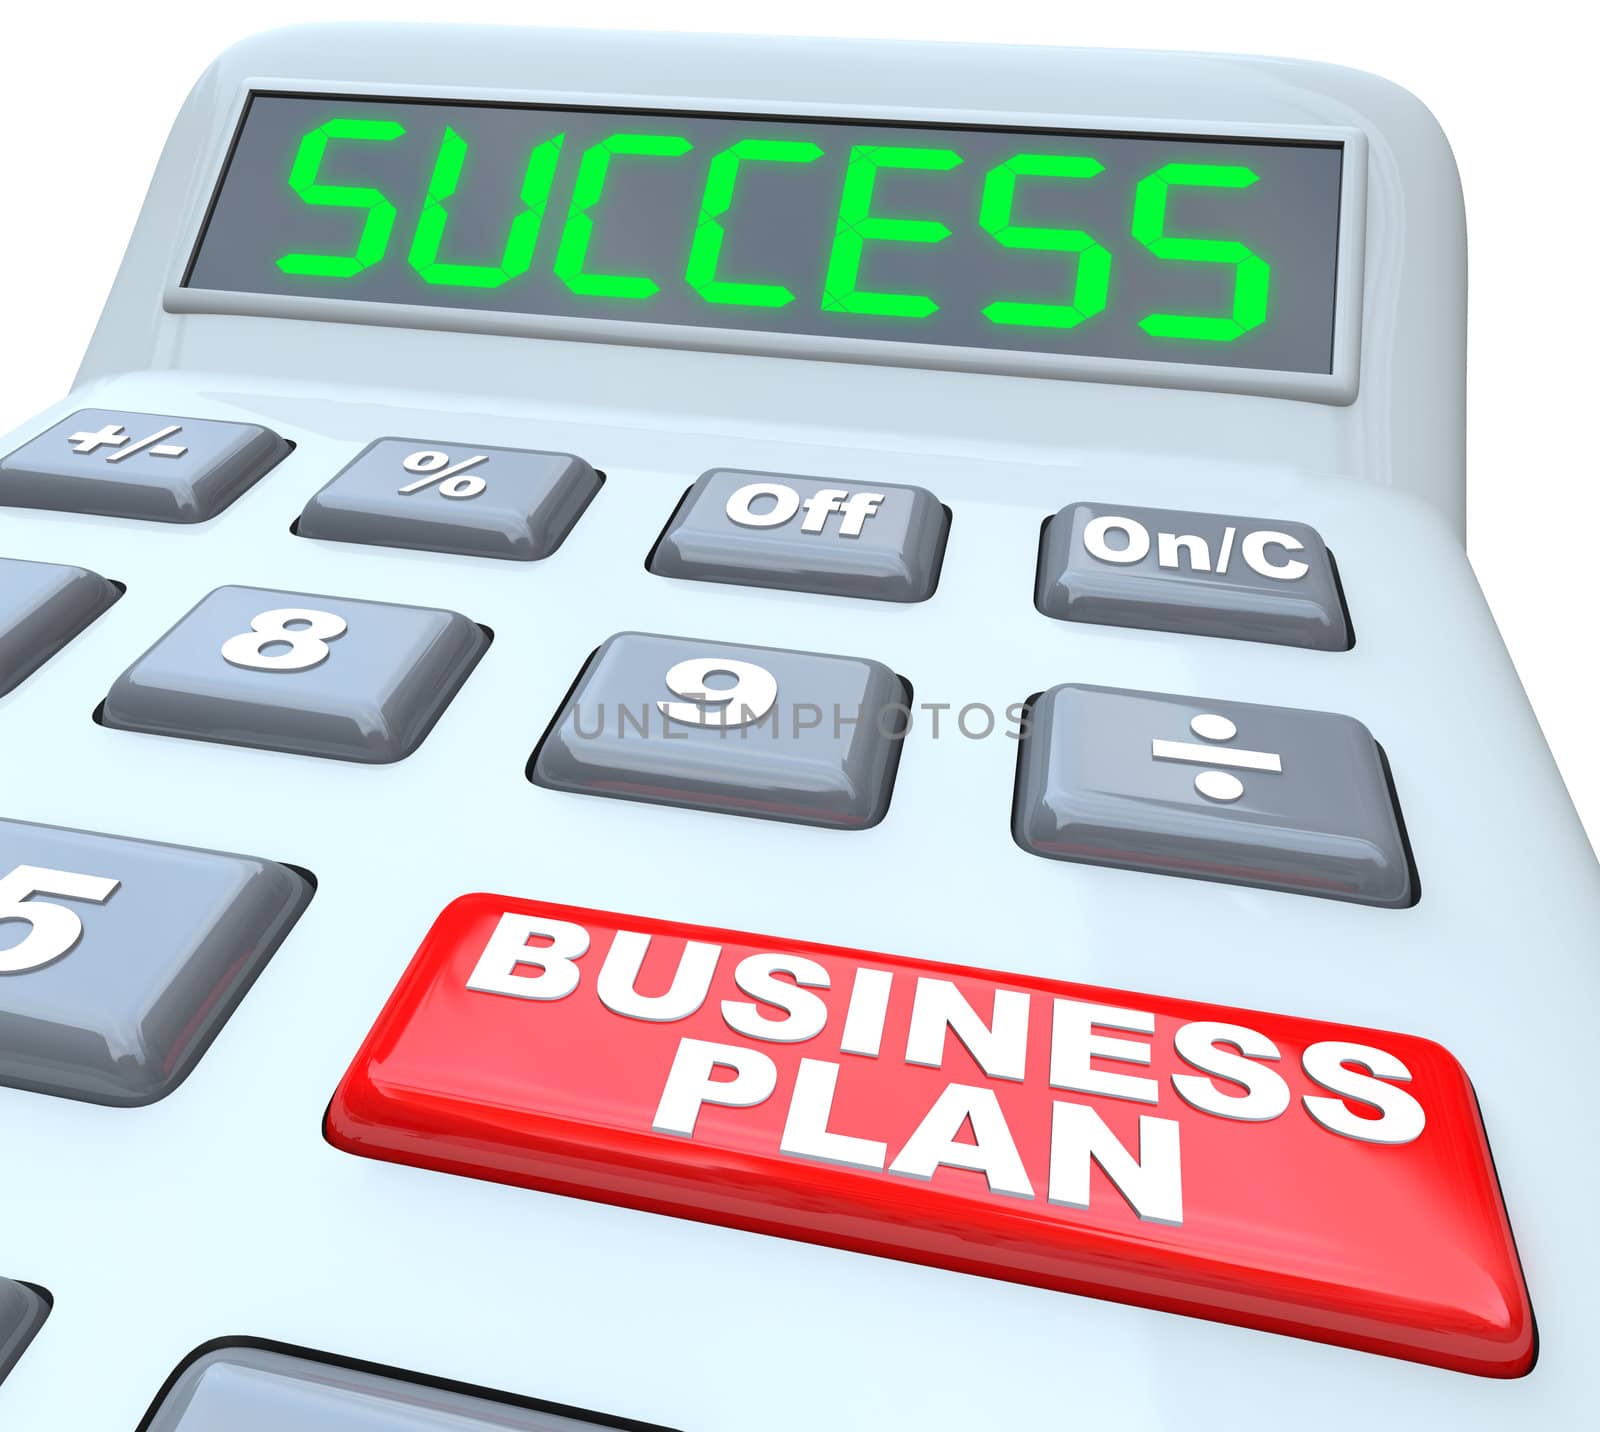 The words Business Plan on a red button of a calculator with the word Success on its digital display to illustrate the importance of having a vision for your company or organization to succeed